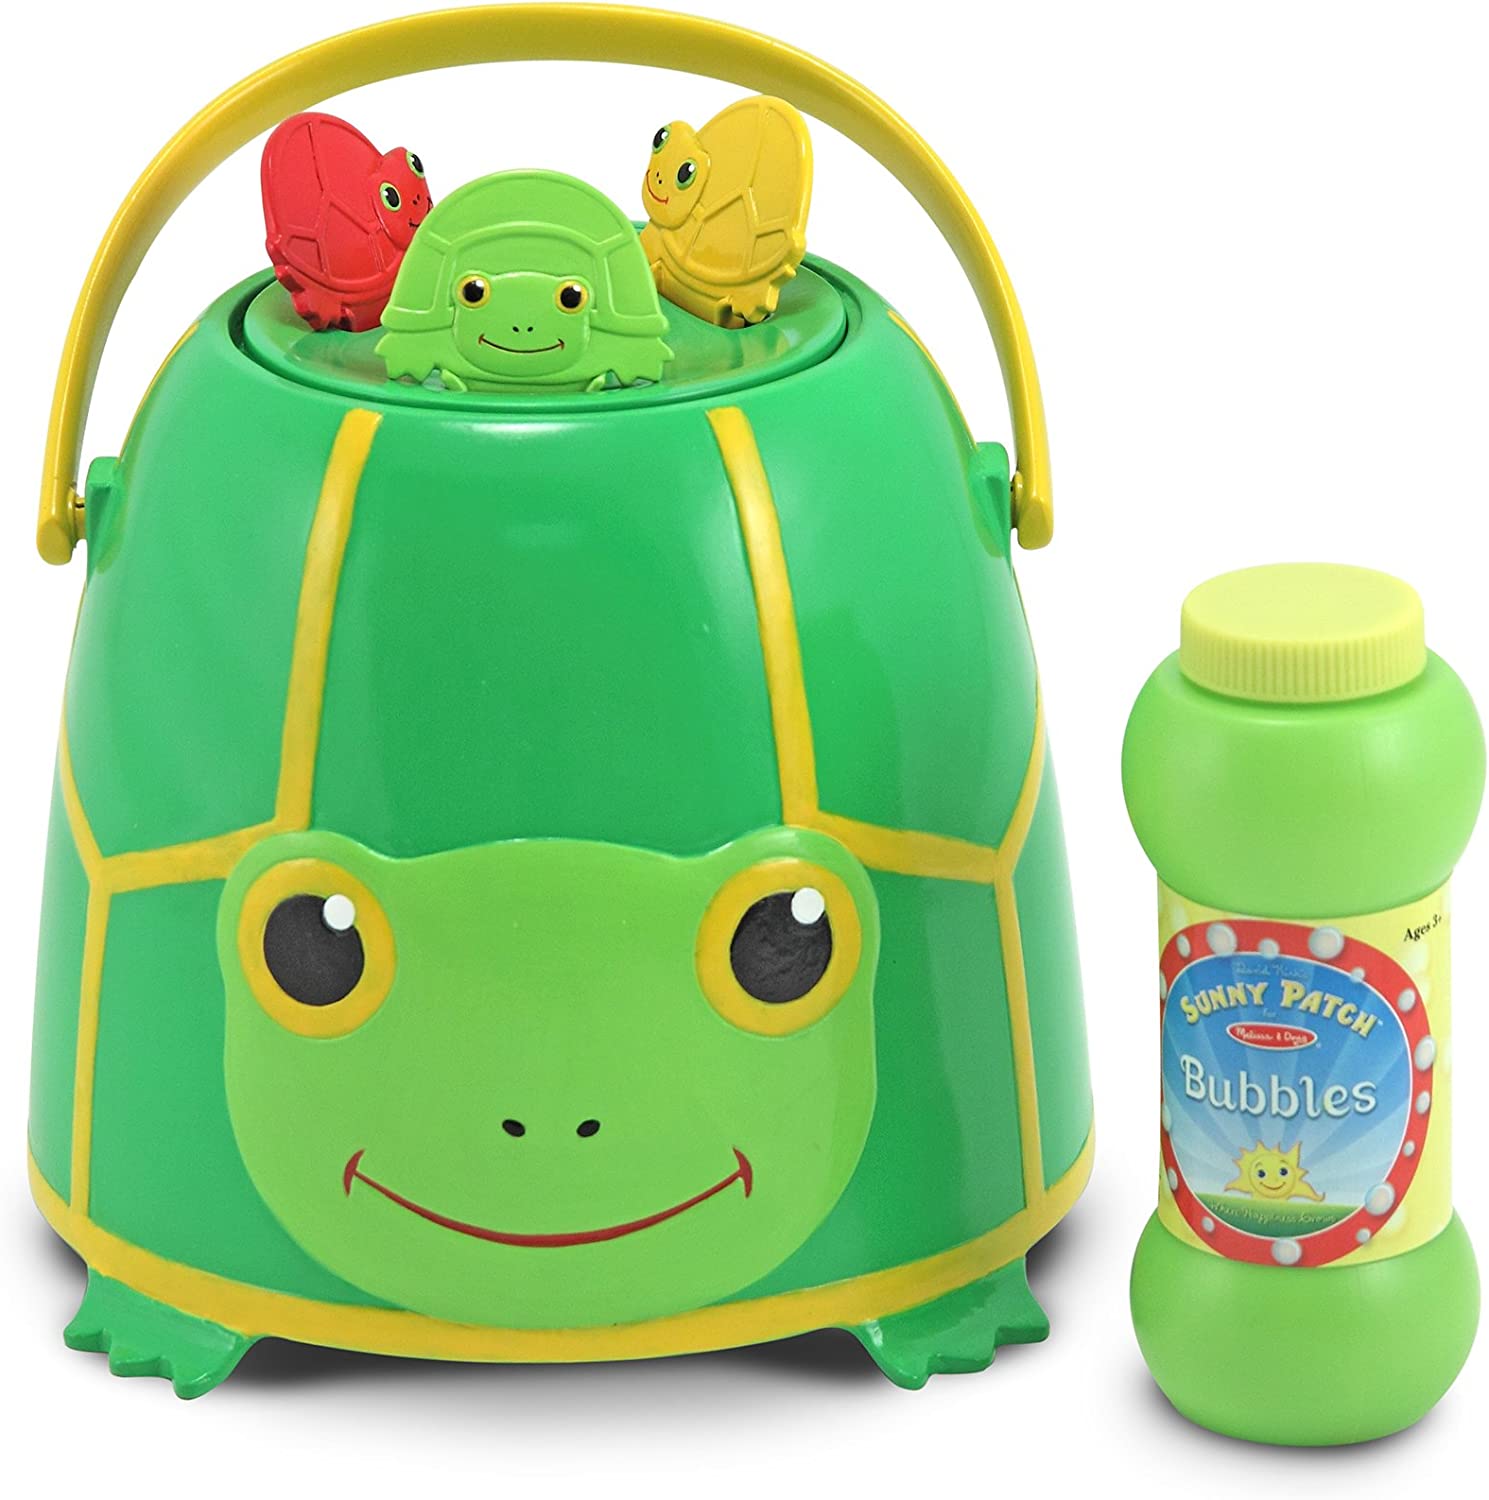 Melissa and Doug Tootle Turtle Bubble Bucket Ages 3+ Item # 6141 Bubble Blowing Fun